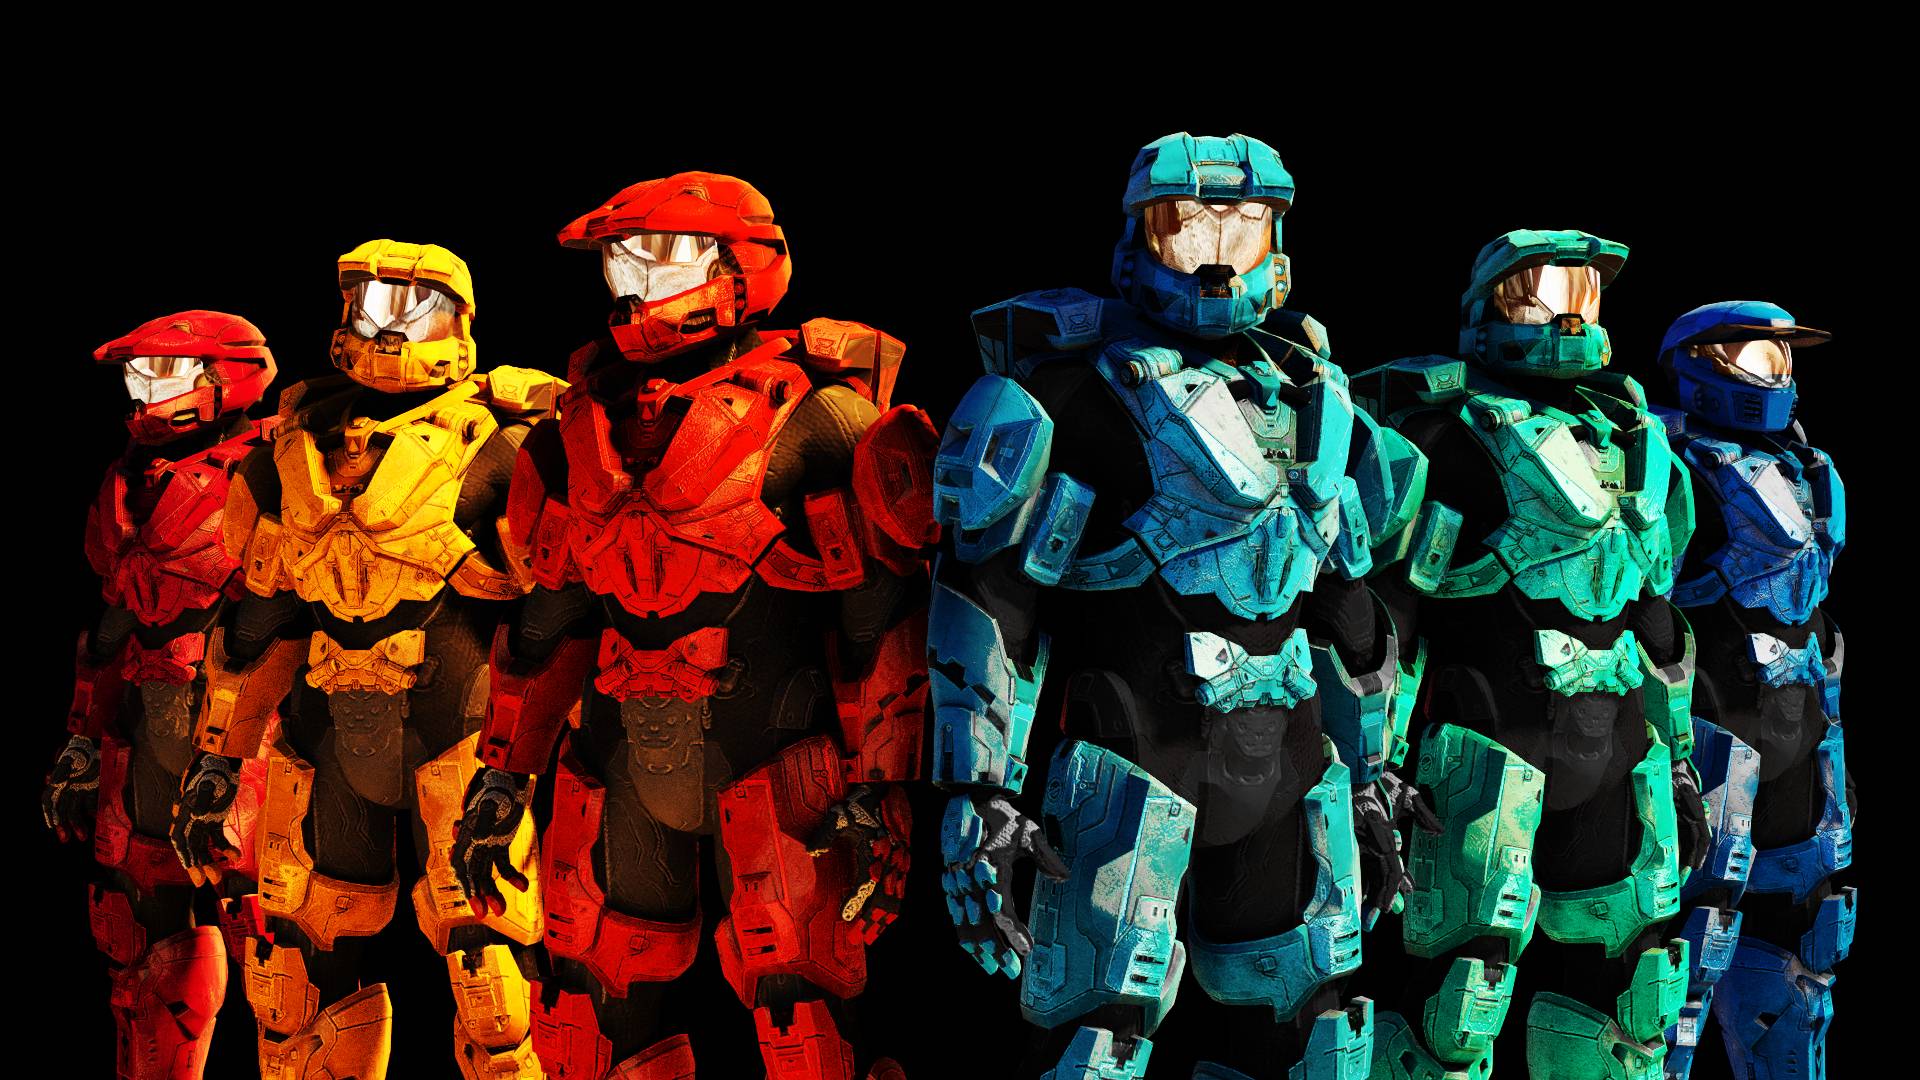 Red Vs Blue Wallpapers - Wallpaper Cave